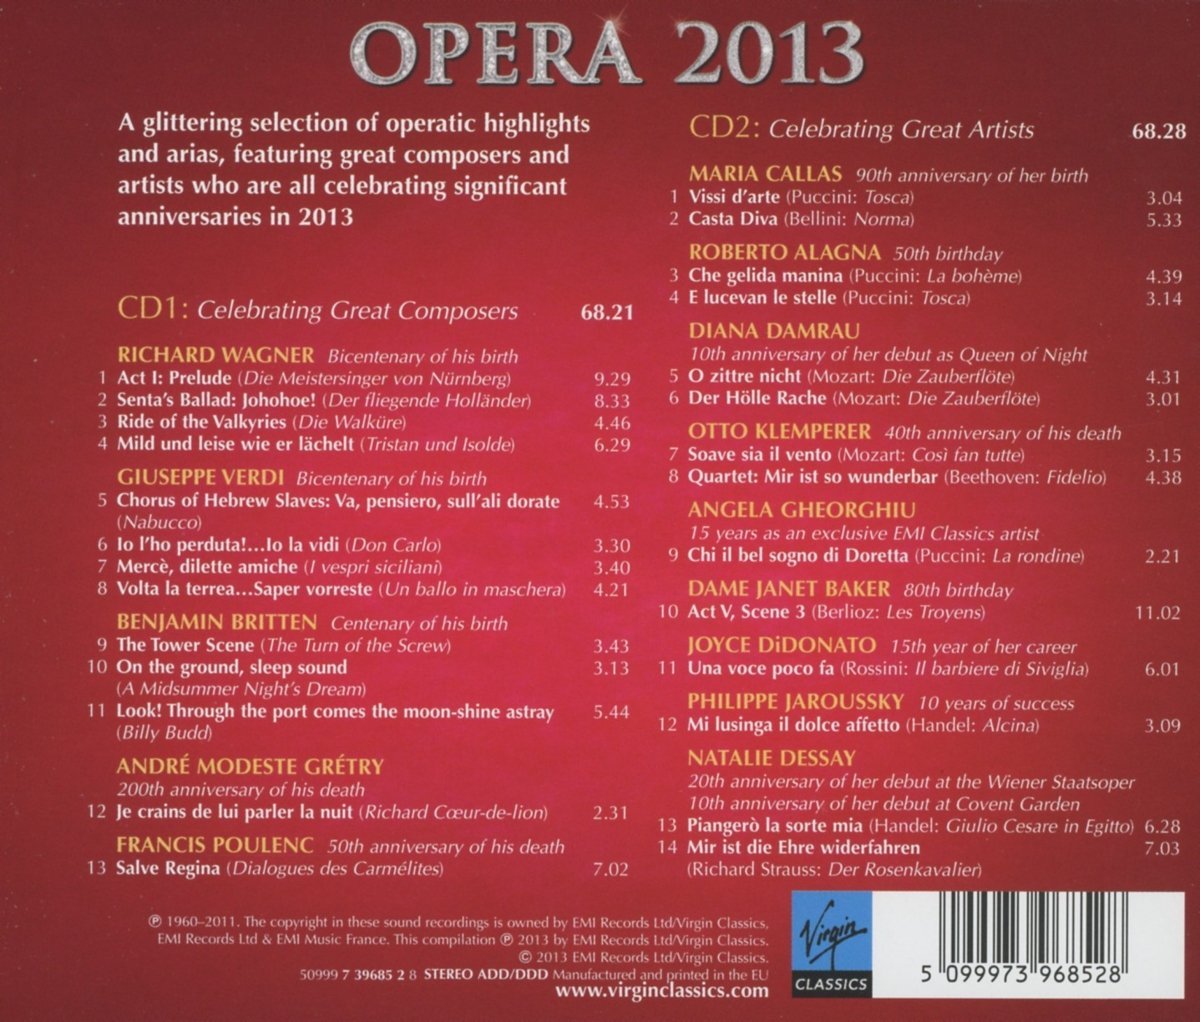 EMI 2-CD collection of operatic highlights and arias, Opera 2013